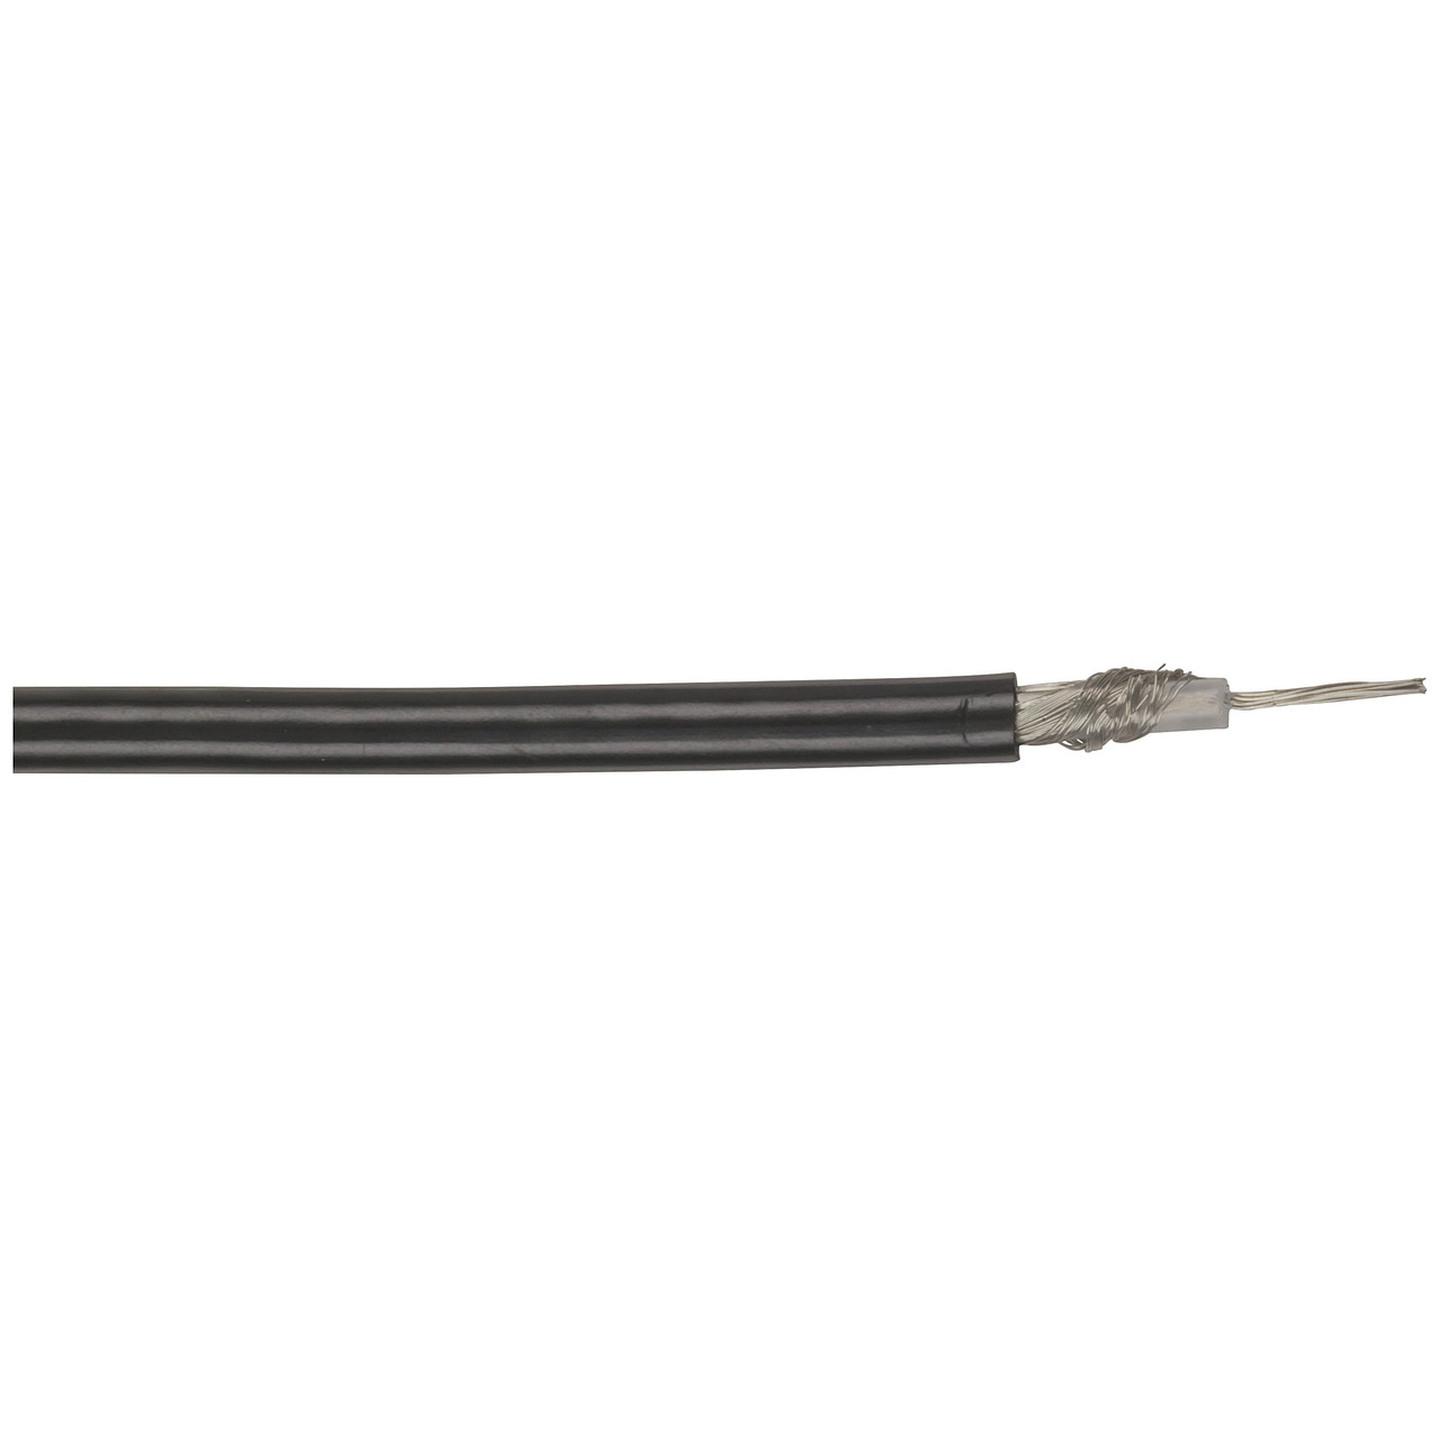 50 Ohm RG58 C/U Networking Cable